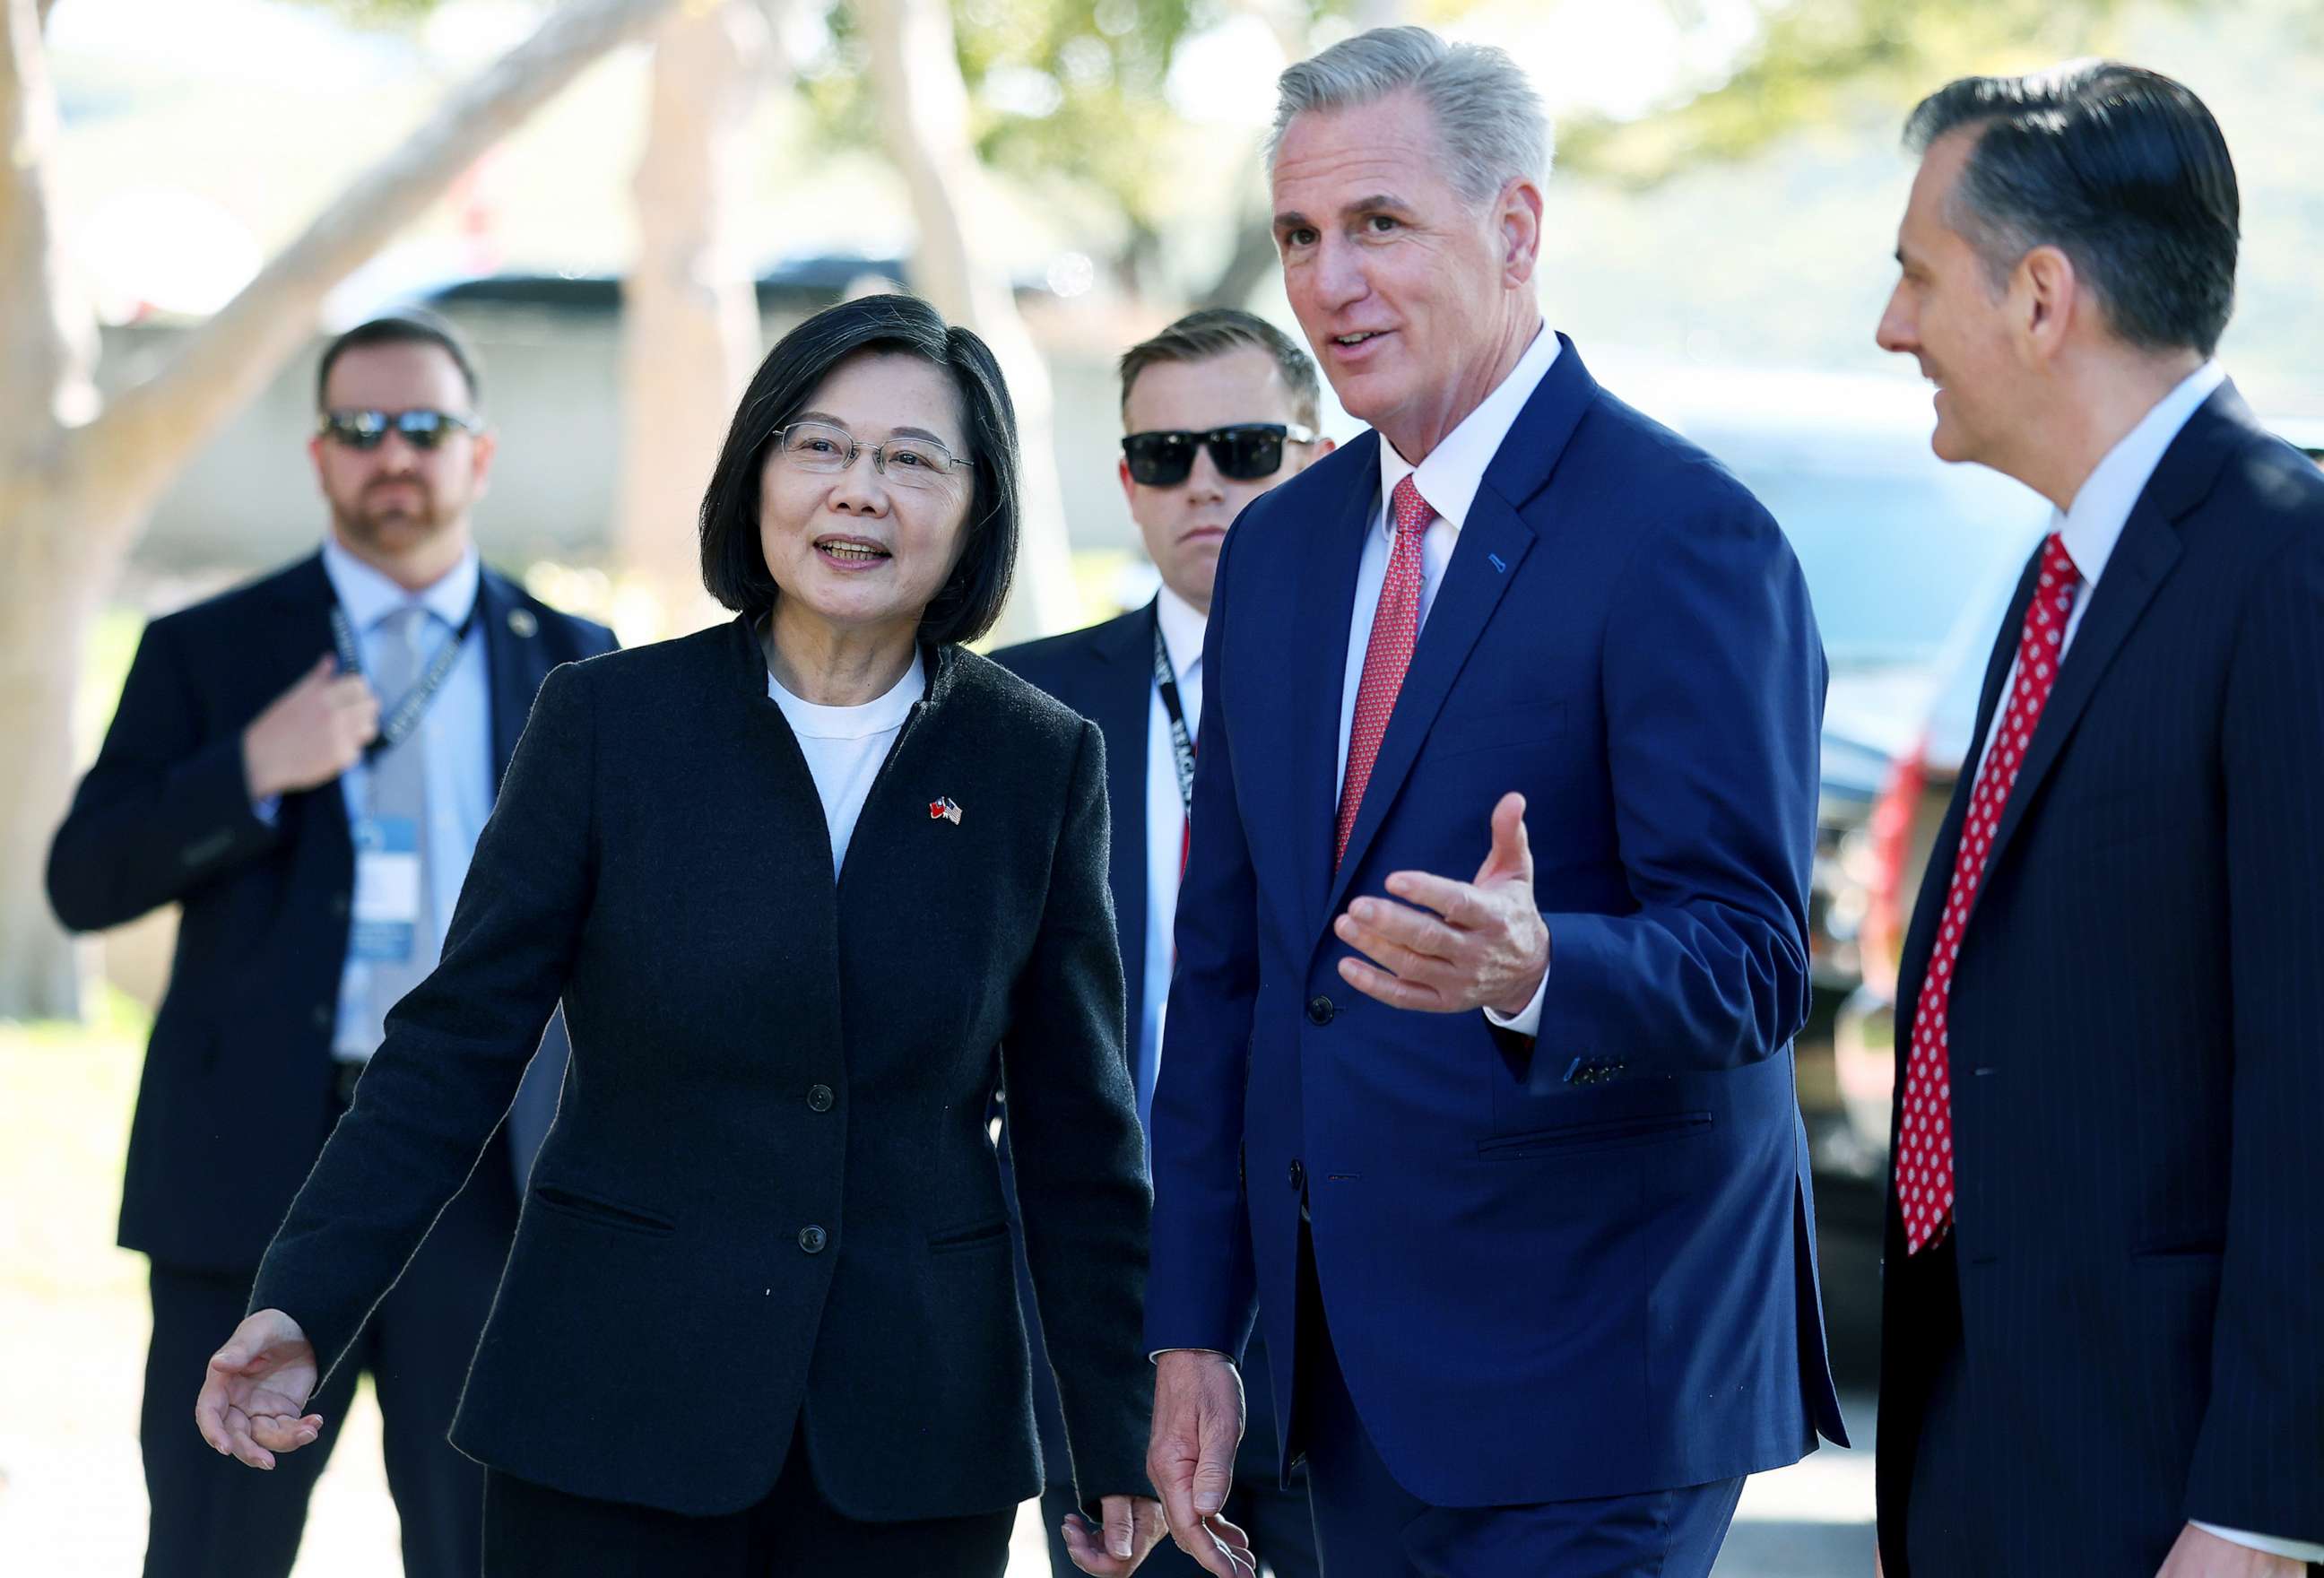 PHOTO: Speaker of the House Kevin McCarthy greets Taiwanese President Tsai Ing-wen on arrival at the Ronald Reagan Presidential Library for a bipartisan meeting, April 5, 2023, in Simi Valley, Calif.